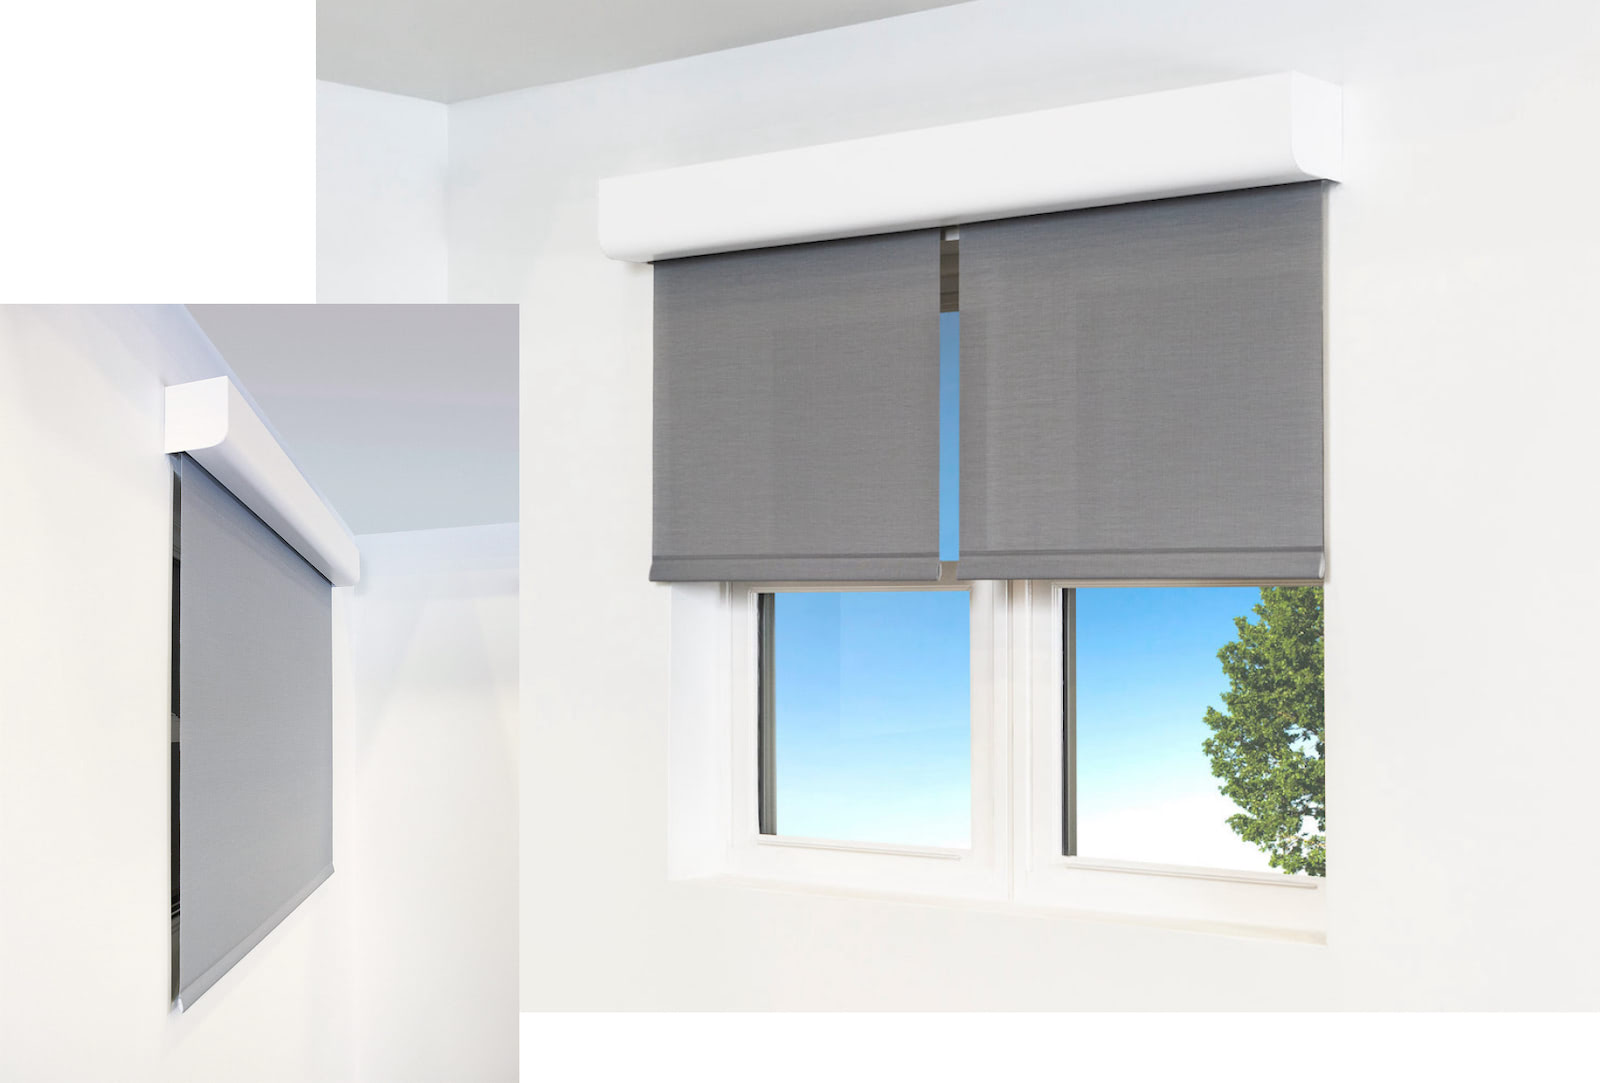 Pictures of 2 windows using Architectural shade hardware